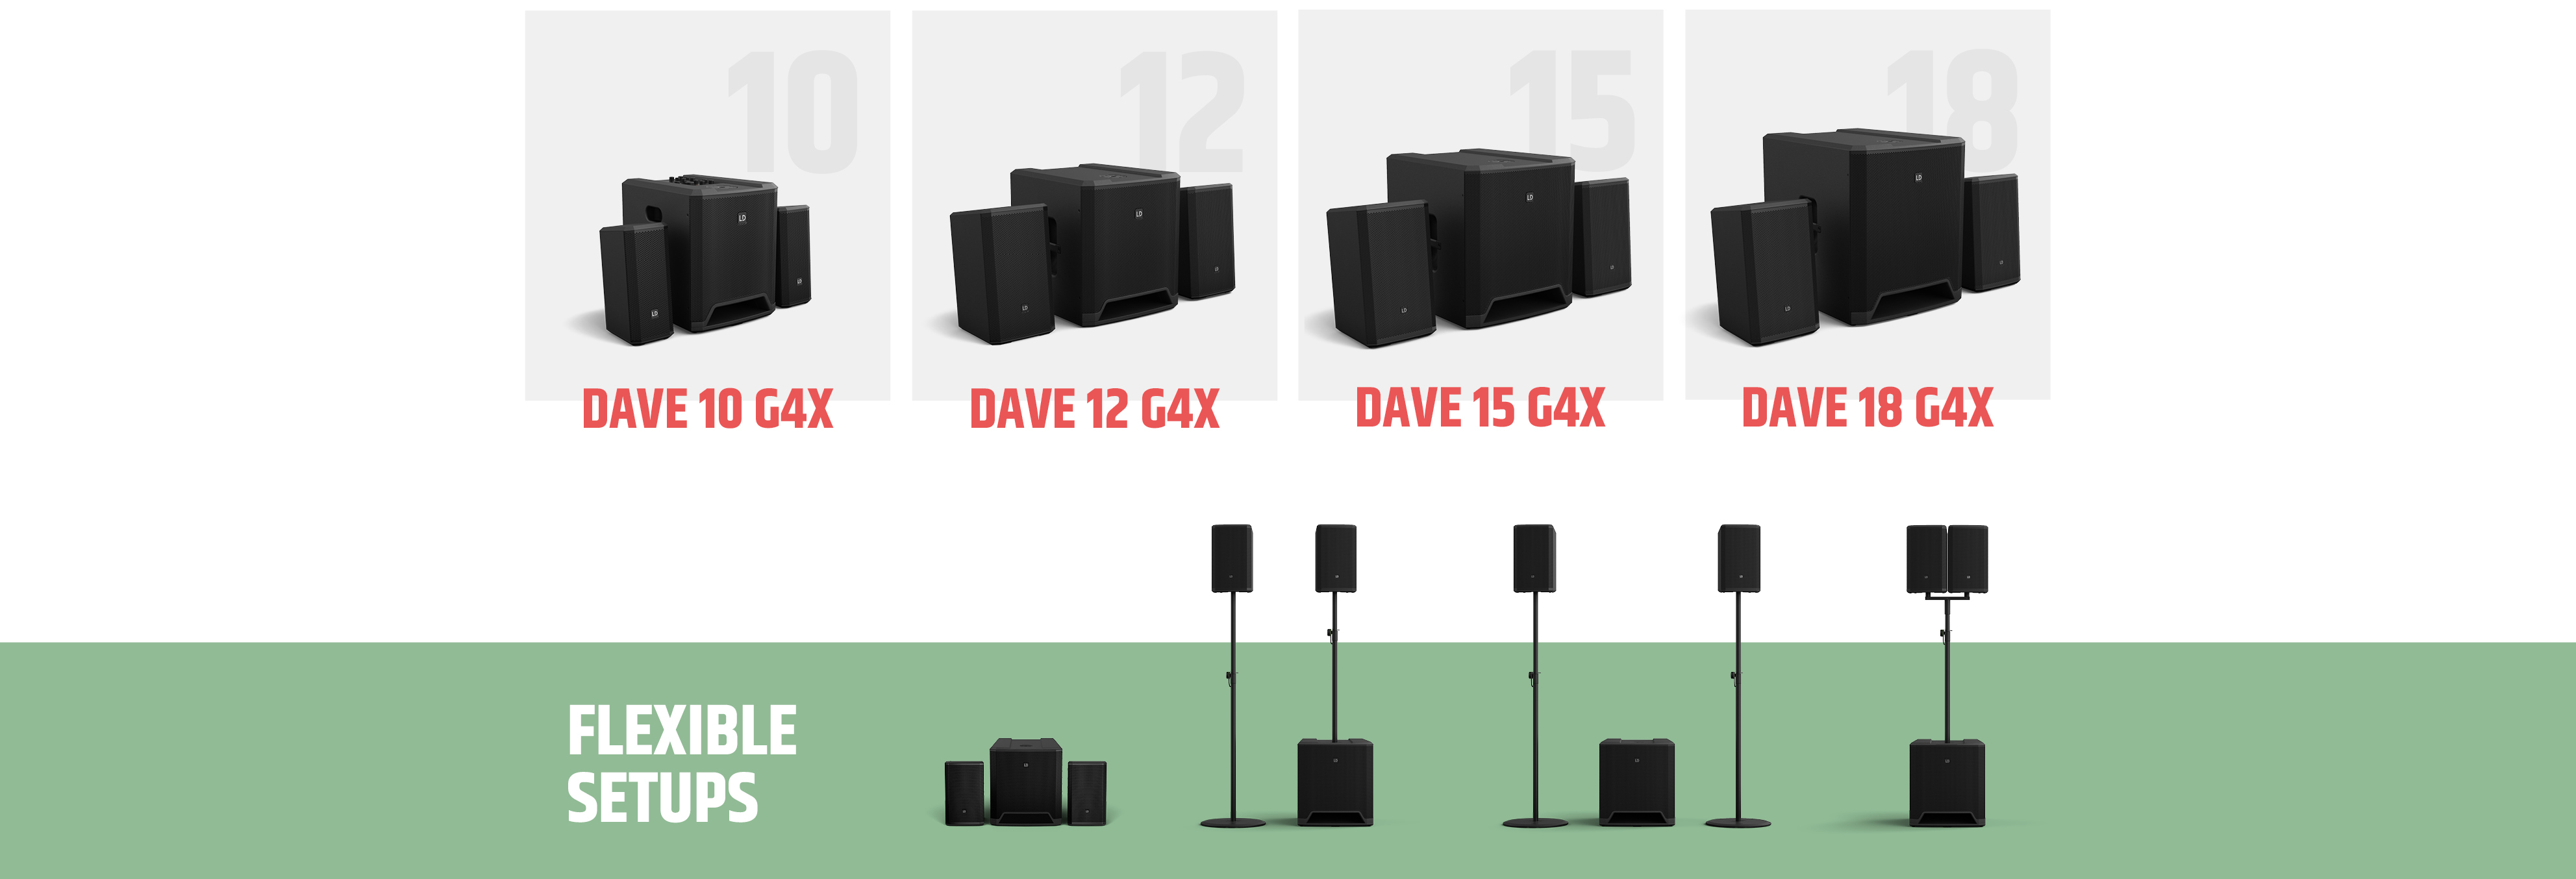 LD Systems DAVE G4X Series Overview 